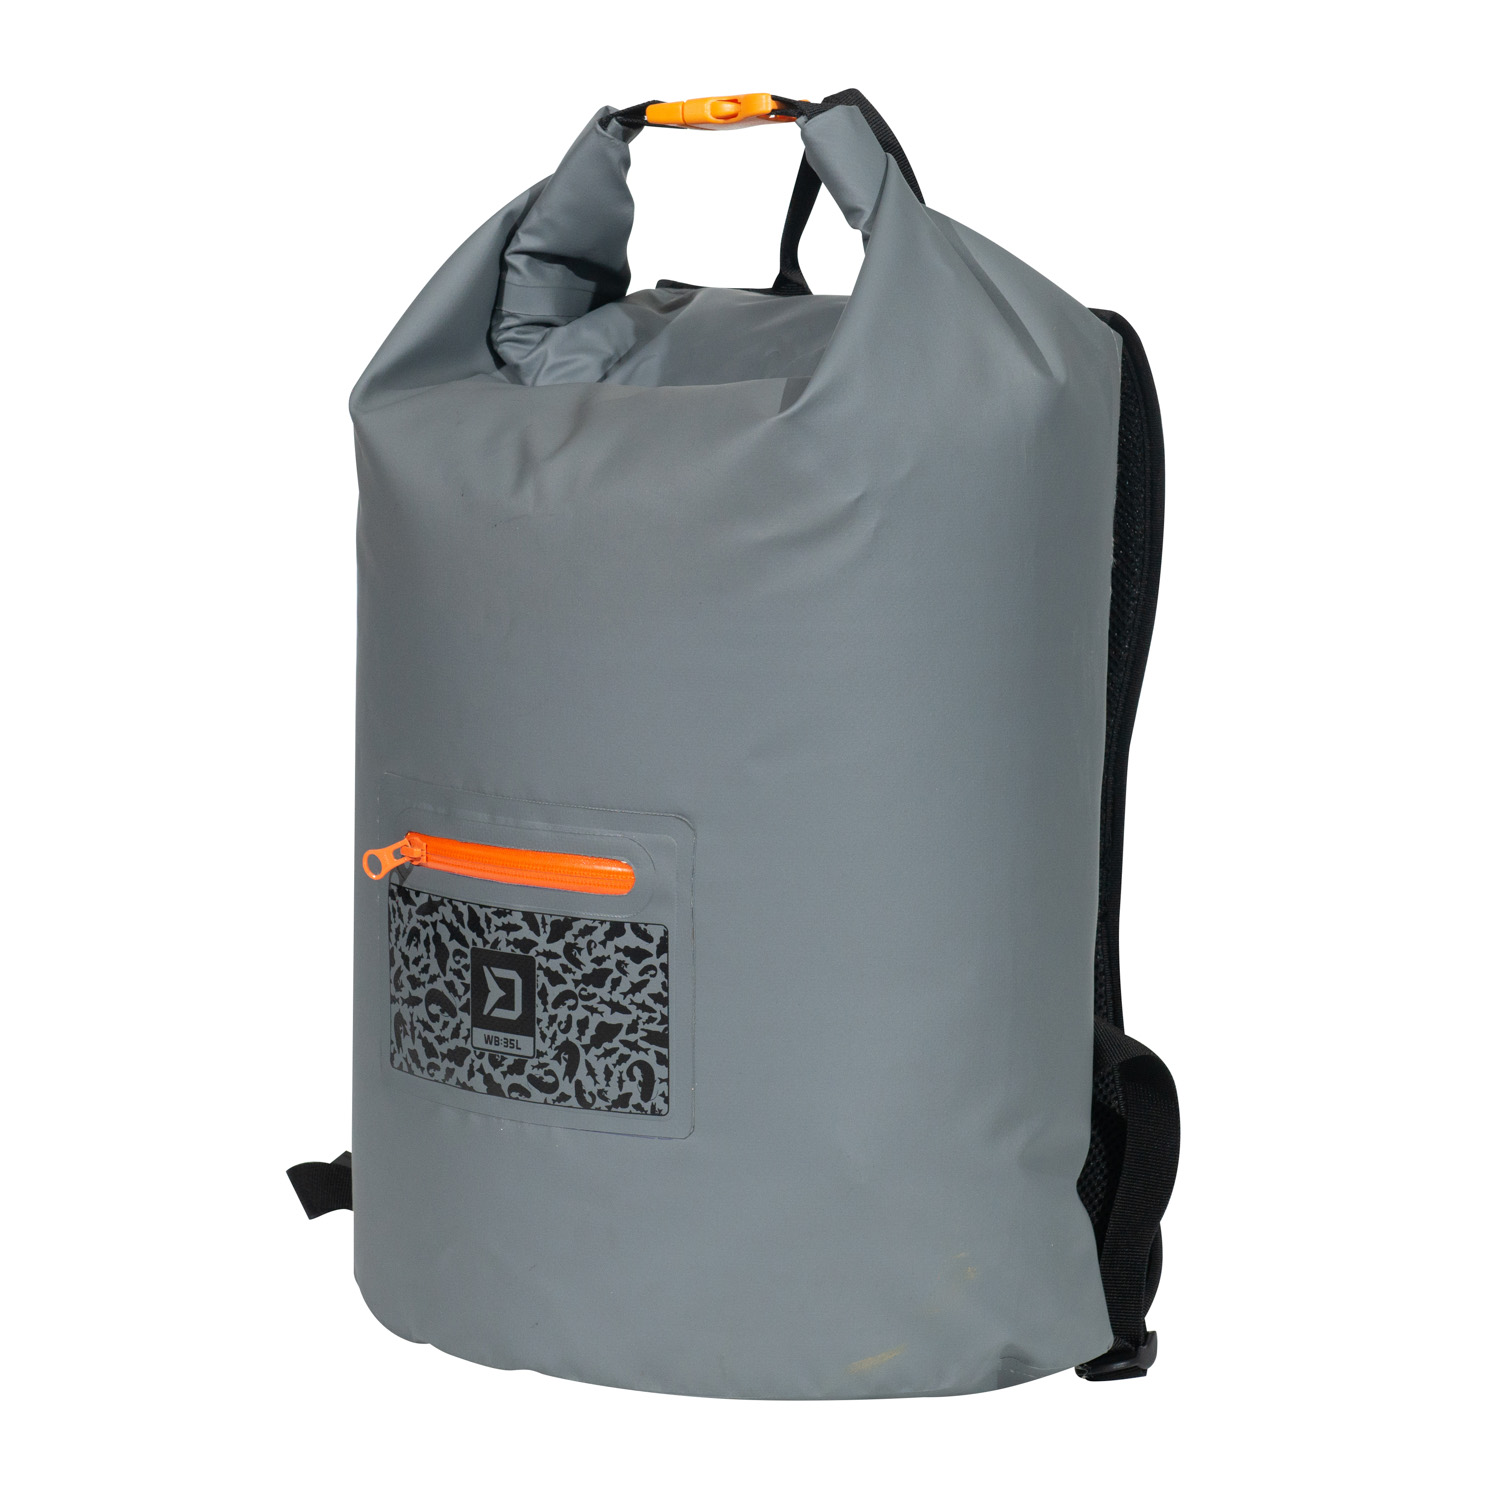 Overboard Waterproof Dry Tube Bag 20 Litres | Shopee Singapore